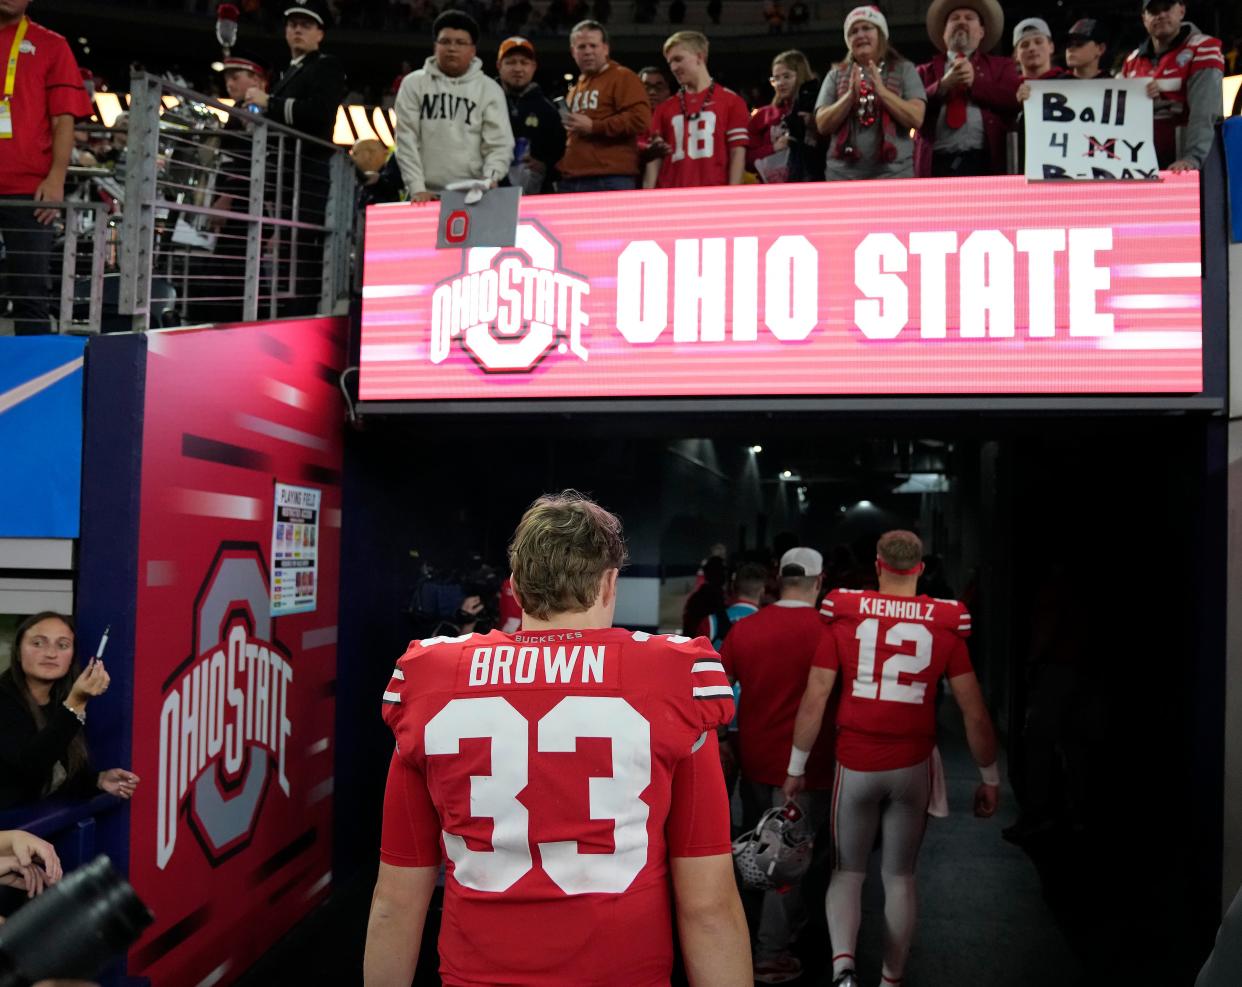 Dec 29, 2023; Arlington, Texas, USA; Ohio State Buckeyes quarterback Devin Brown (33) and Ohio State Buckeyes quarterback Lincoln Kienholz (12) walk off the field after losing 14-3 to Missouri Tigers in the Goodyear Cotton Bowl Classic at AT&T Stadium.